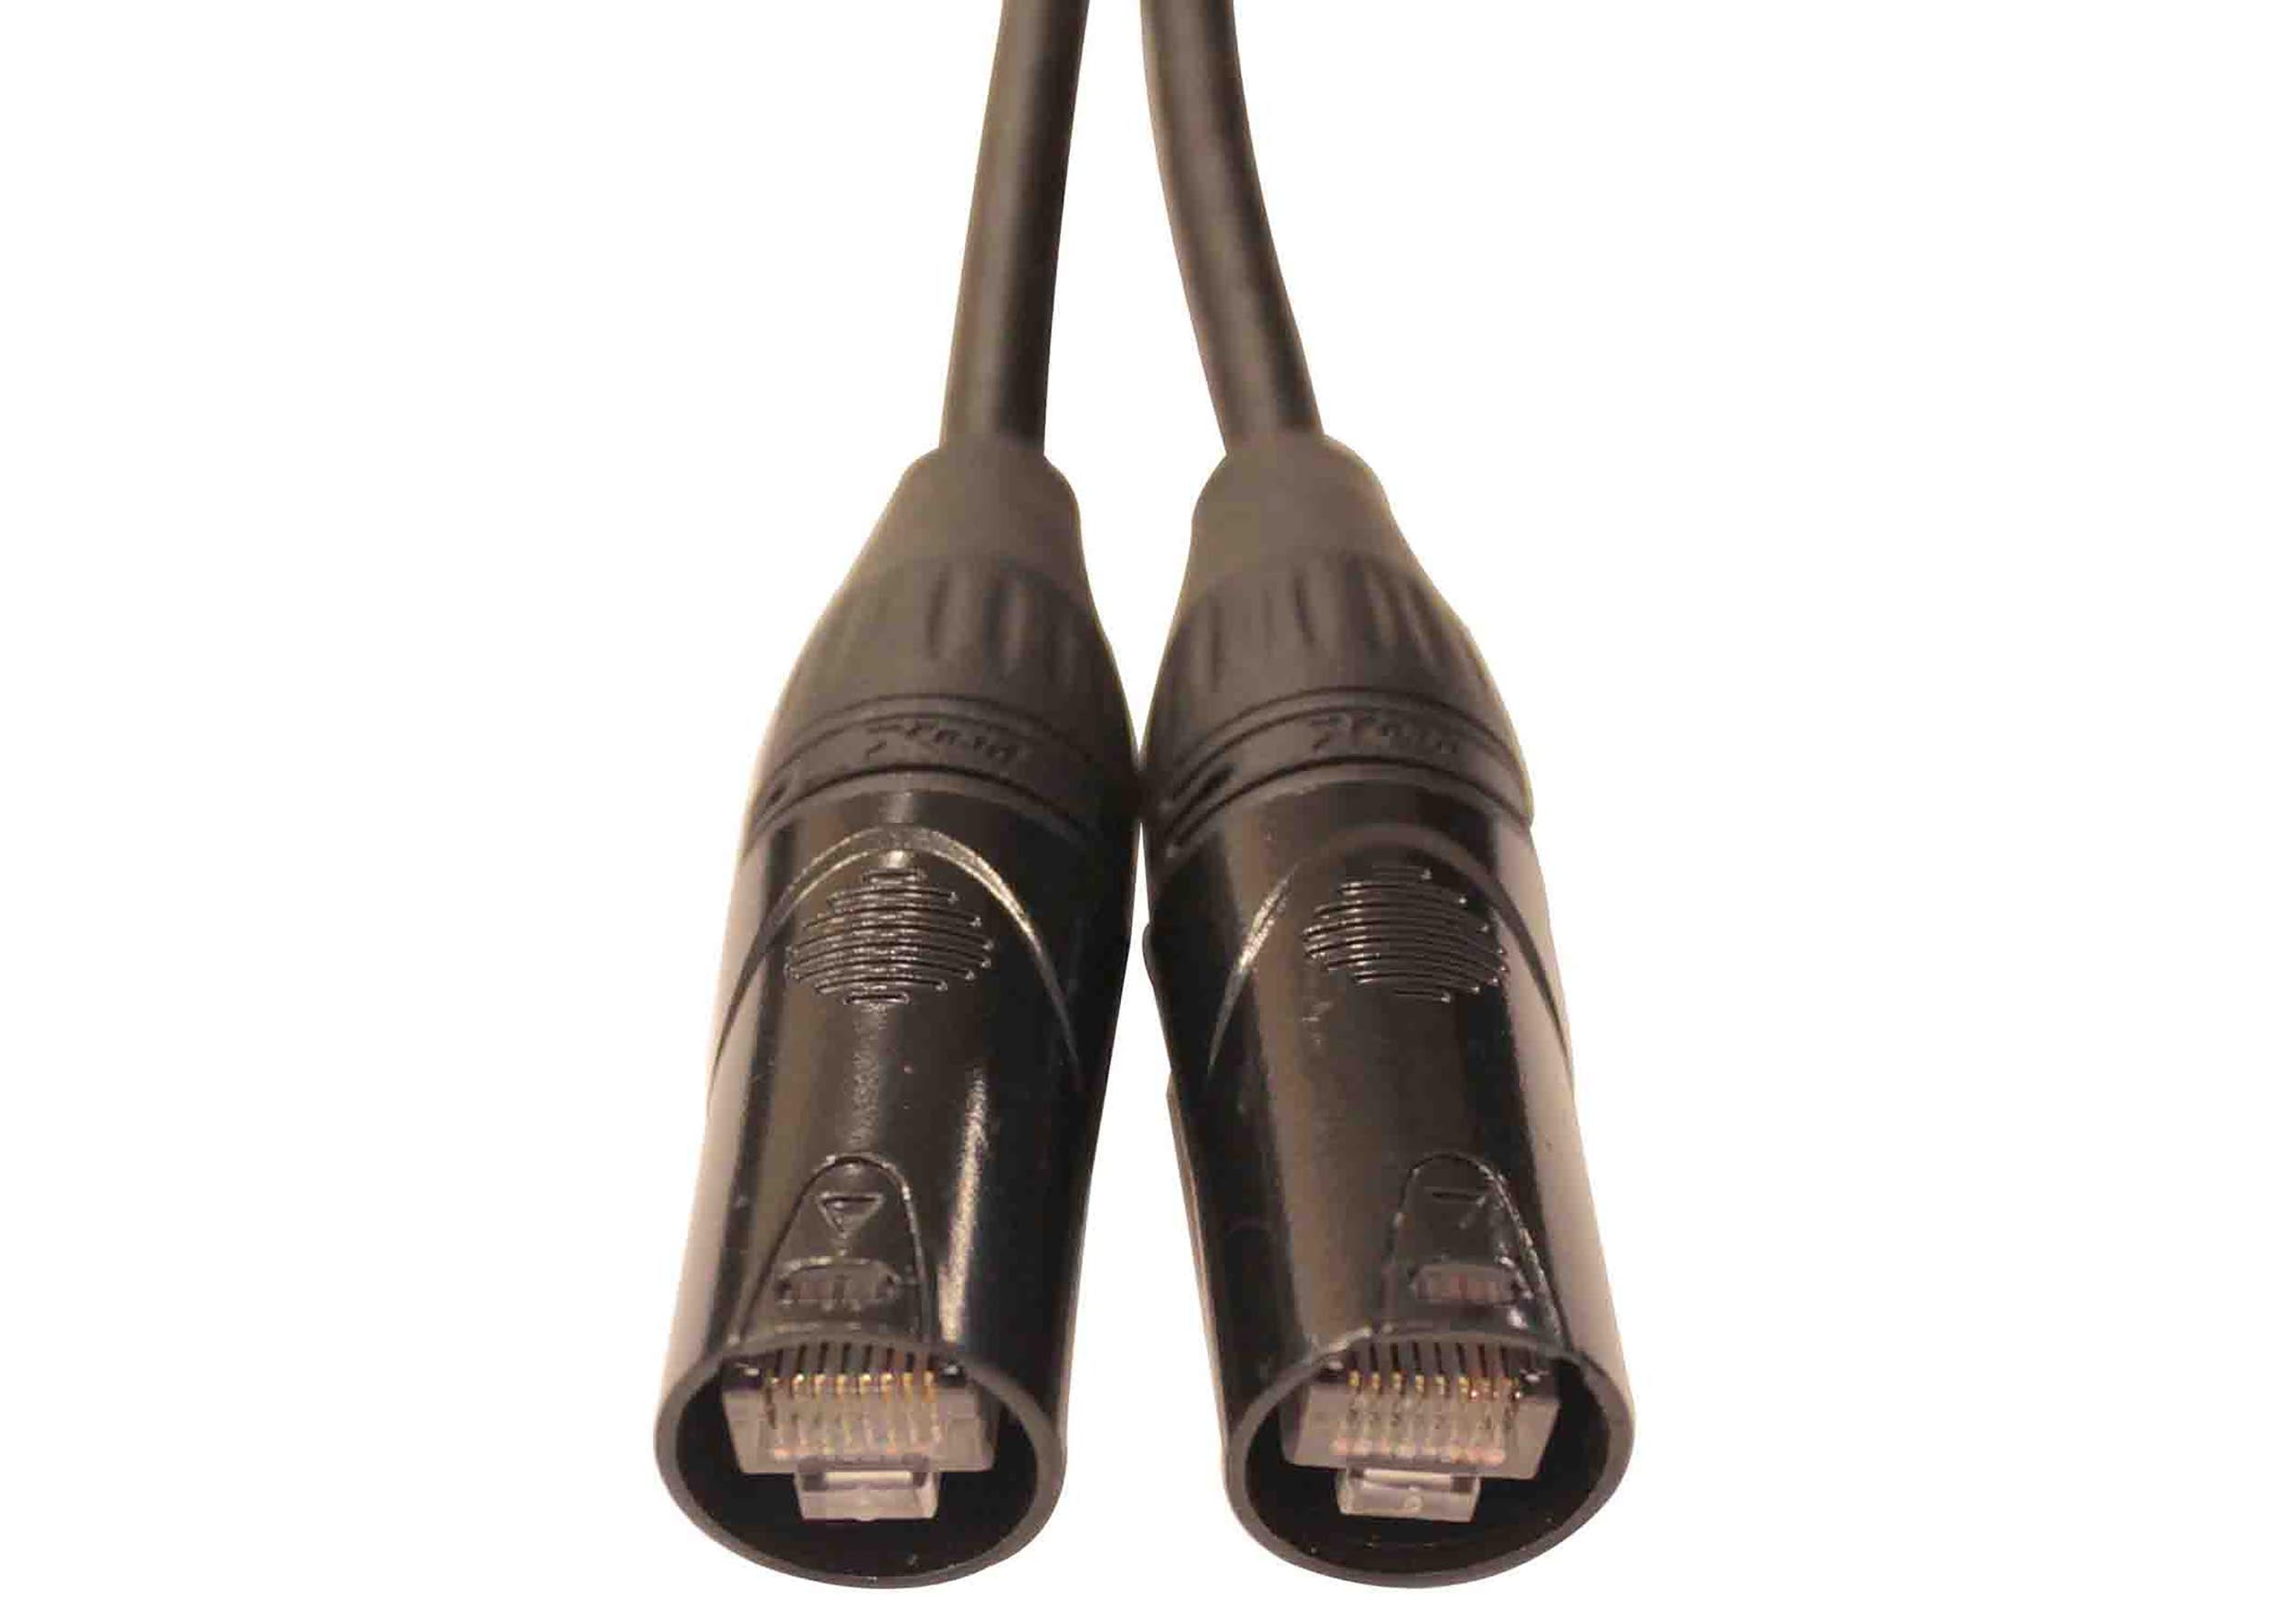 Prox XC-CAT6-25 STP Cat 6 Cable W-RJ45 for Network and Snake Box Connections - 25 Feet by ProX Cases